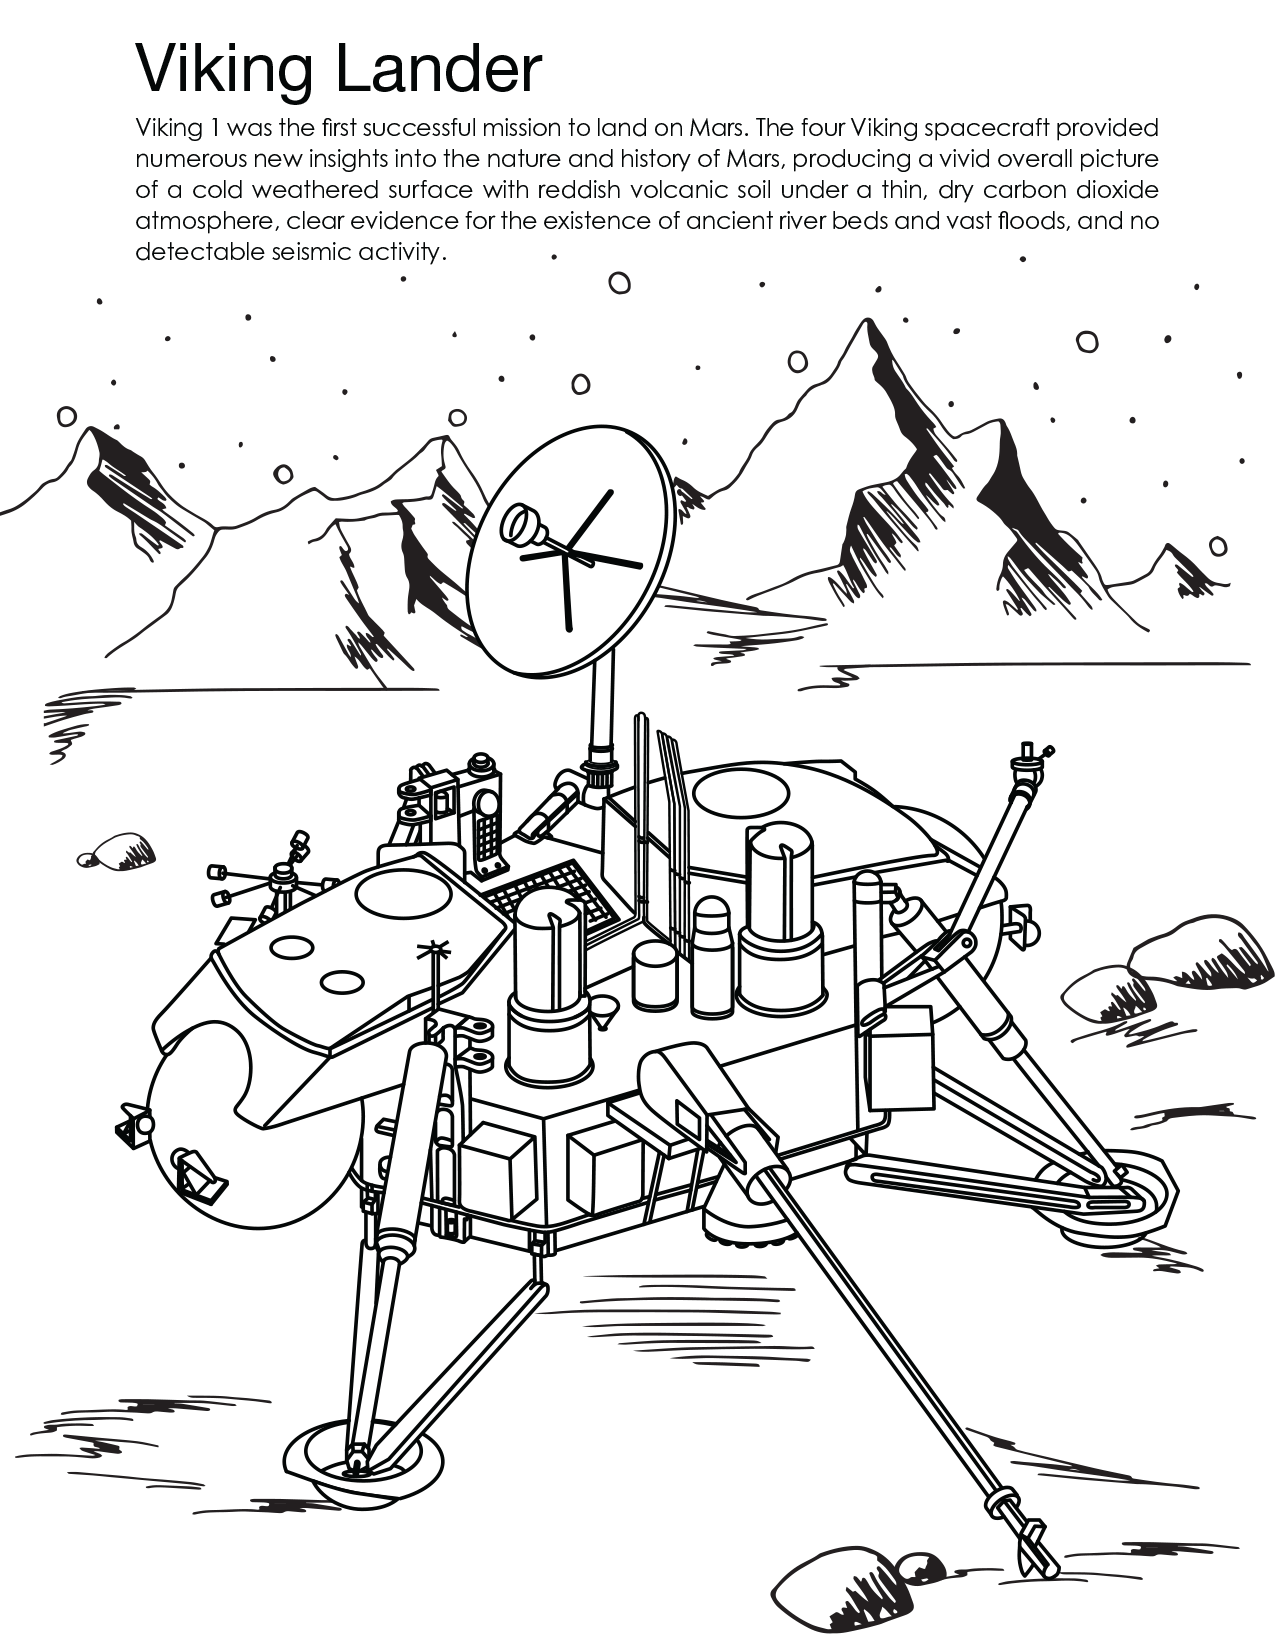 Coloring page for Viking.